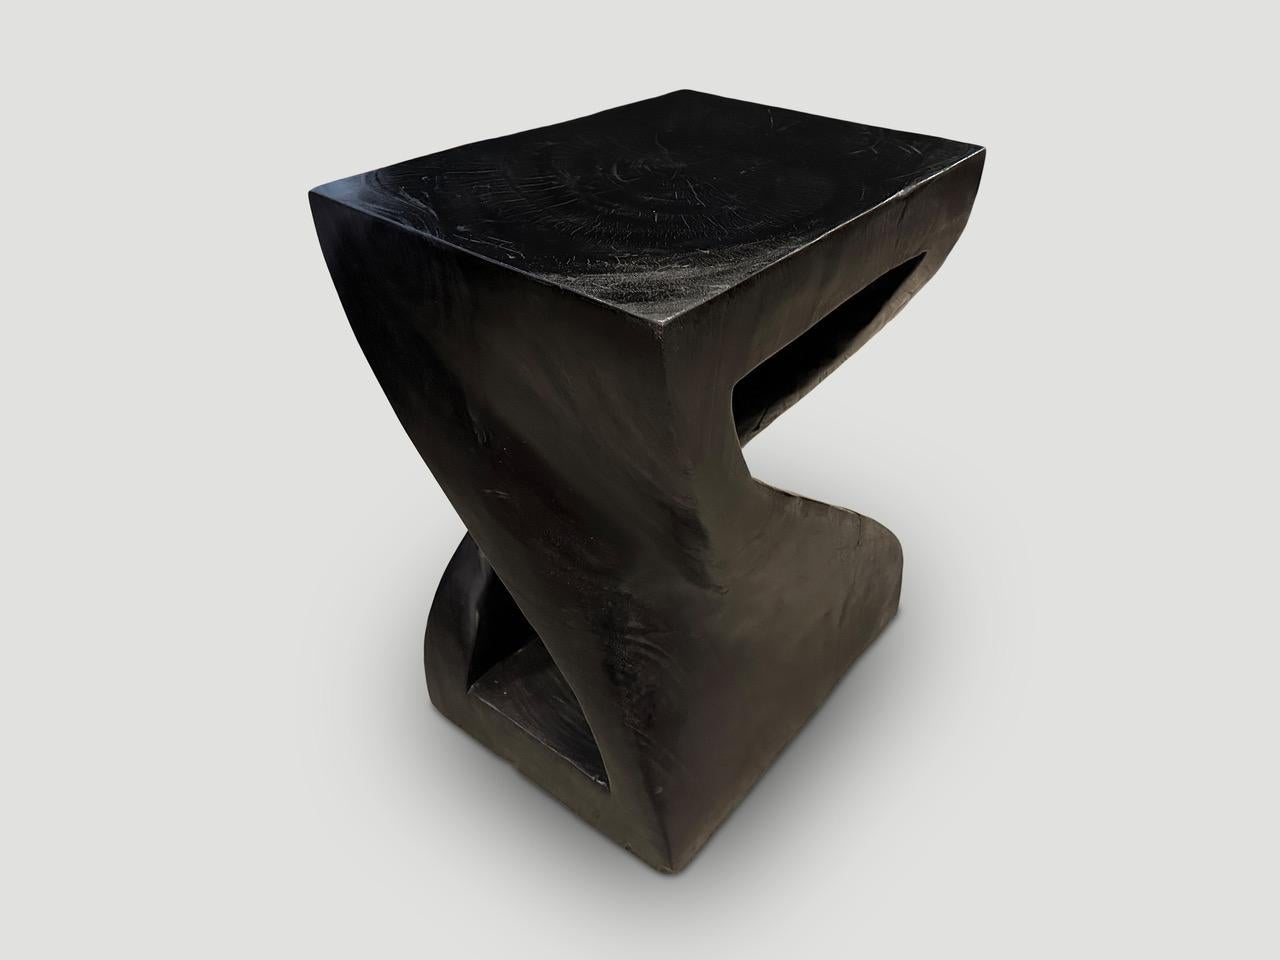 Impressive reclaimed suar wood pedestal. Hand carved into this stunning shape from a single block of wood. Charred, sanded and sealed revealing the beautiful wood grain. Both usable and sculptural.

The Triple Burnt Collection represents a unique